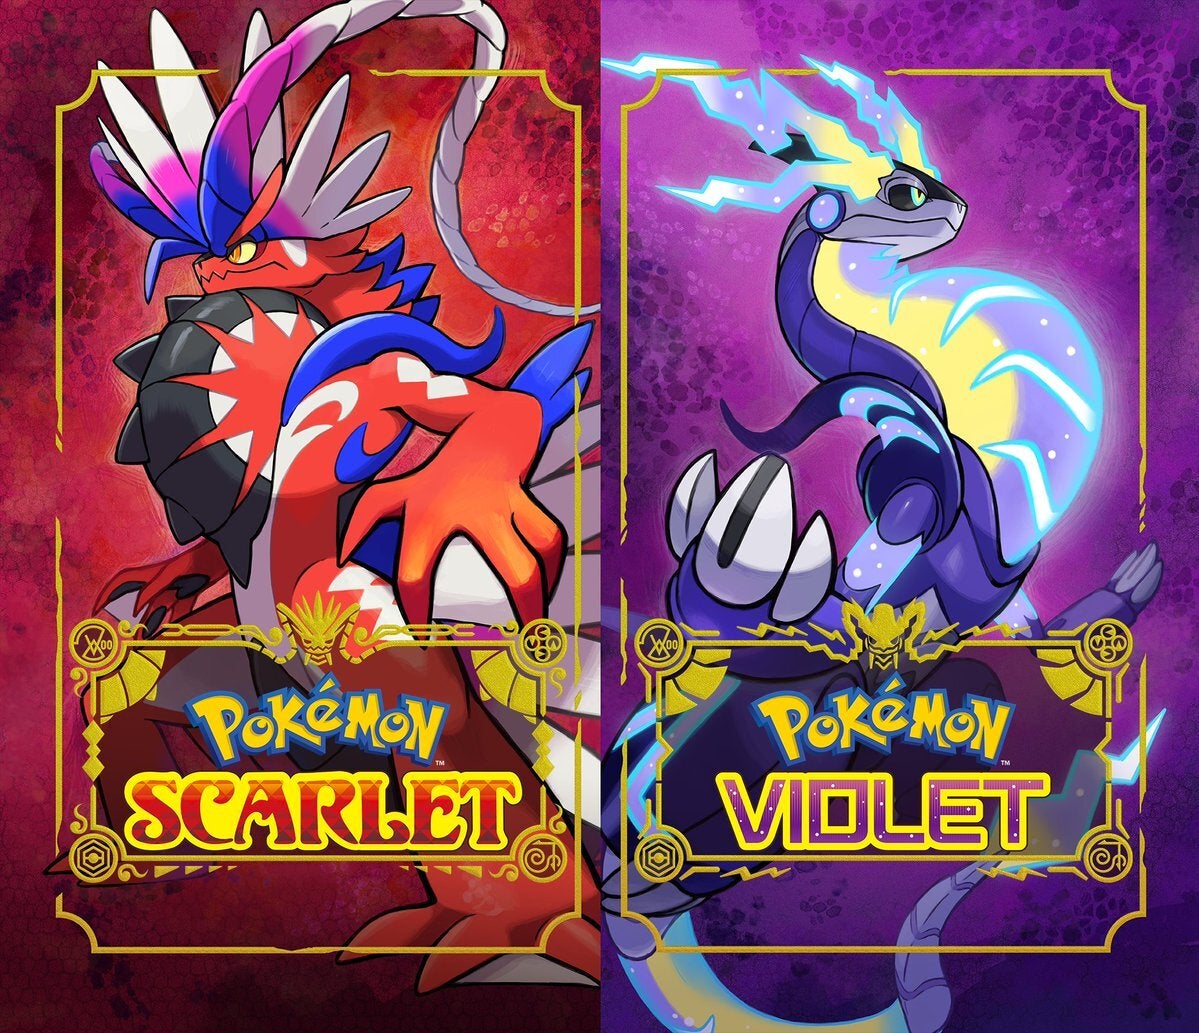 Pokemon Violet and Scarlet have a series first: different professors depending on your version